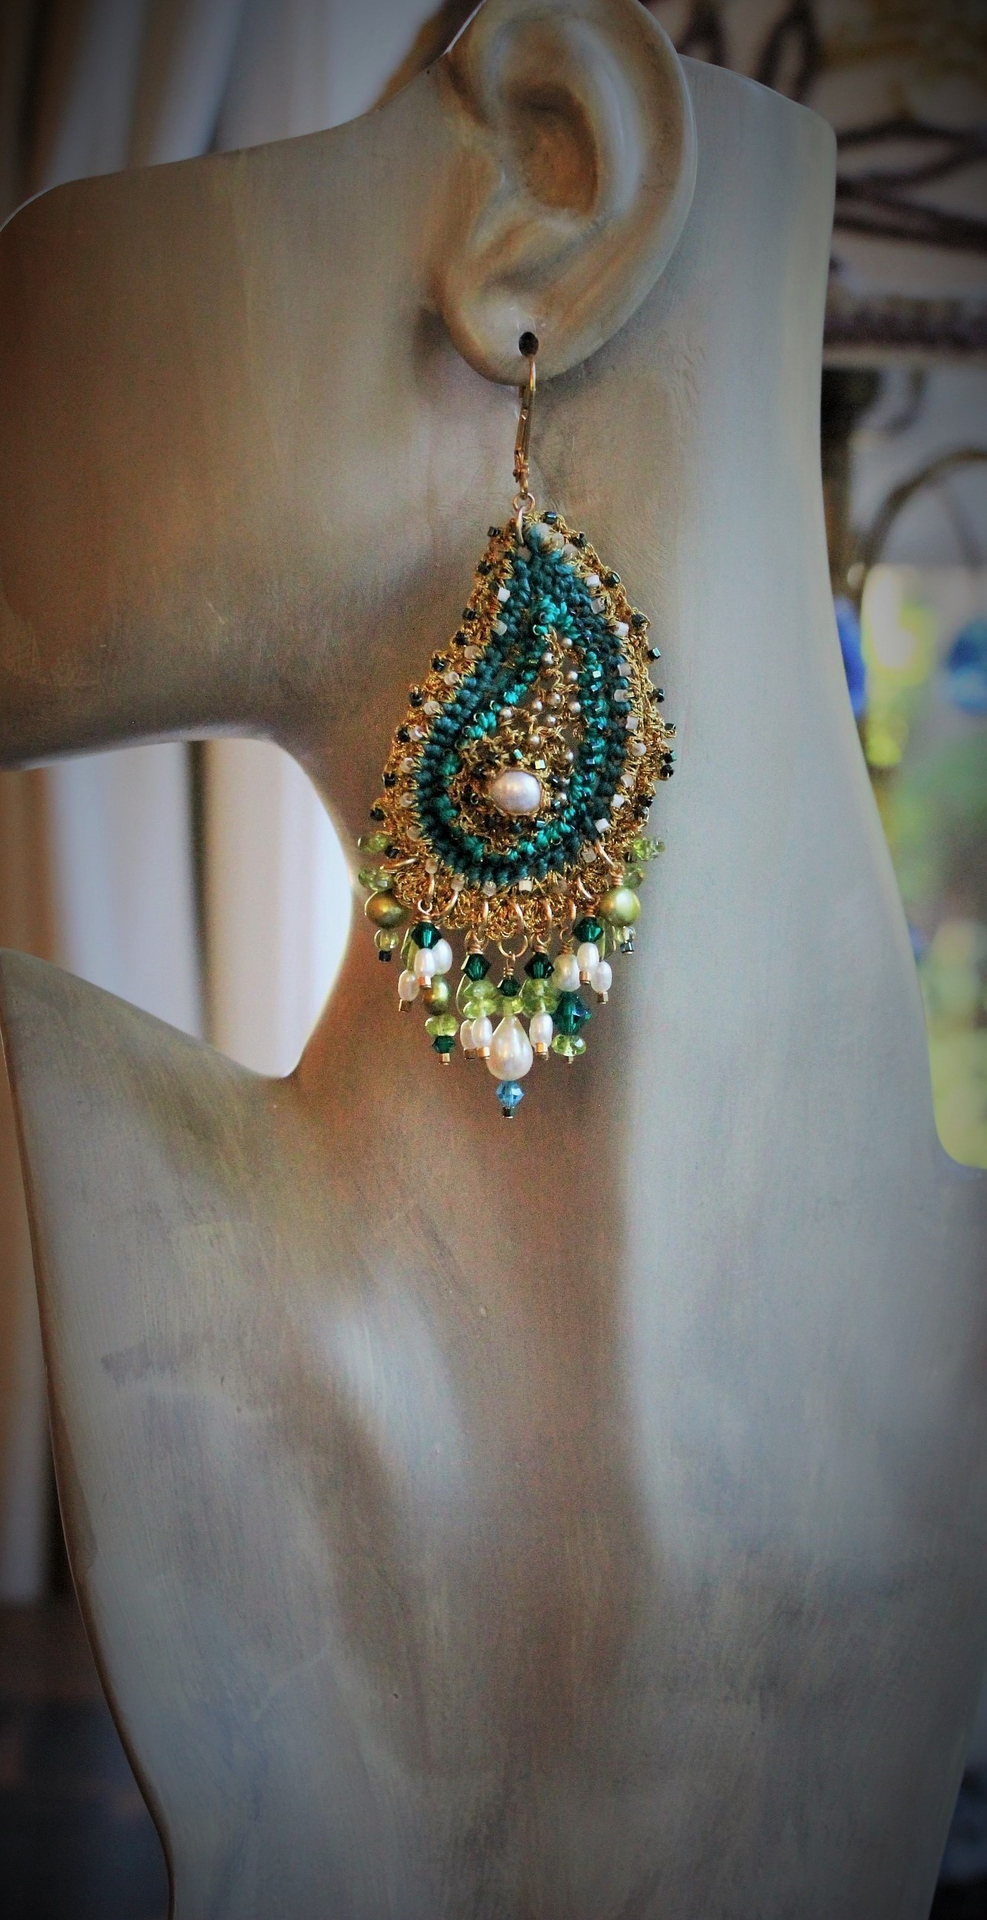 Amazing Intricately Crocheted Peridot, Pearl and Crystal Paisley Earrings